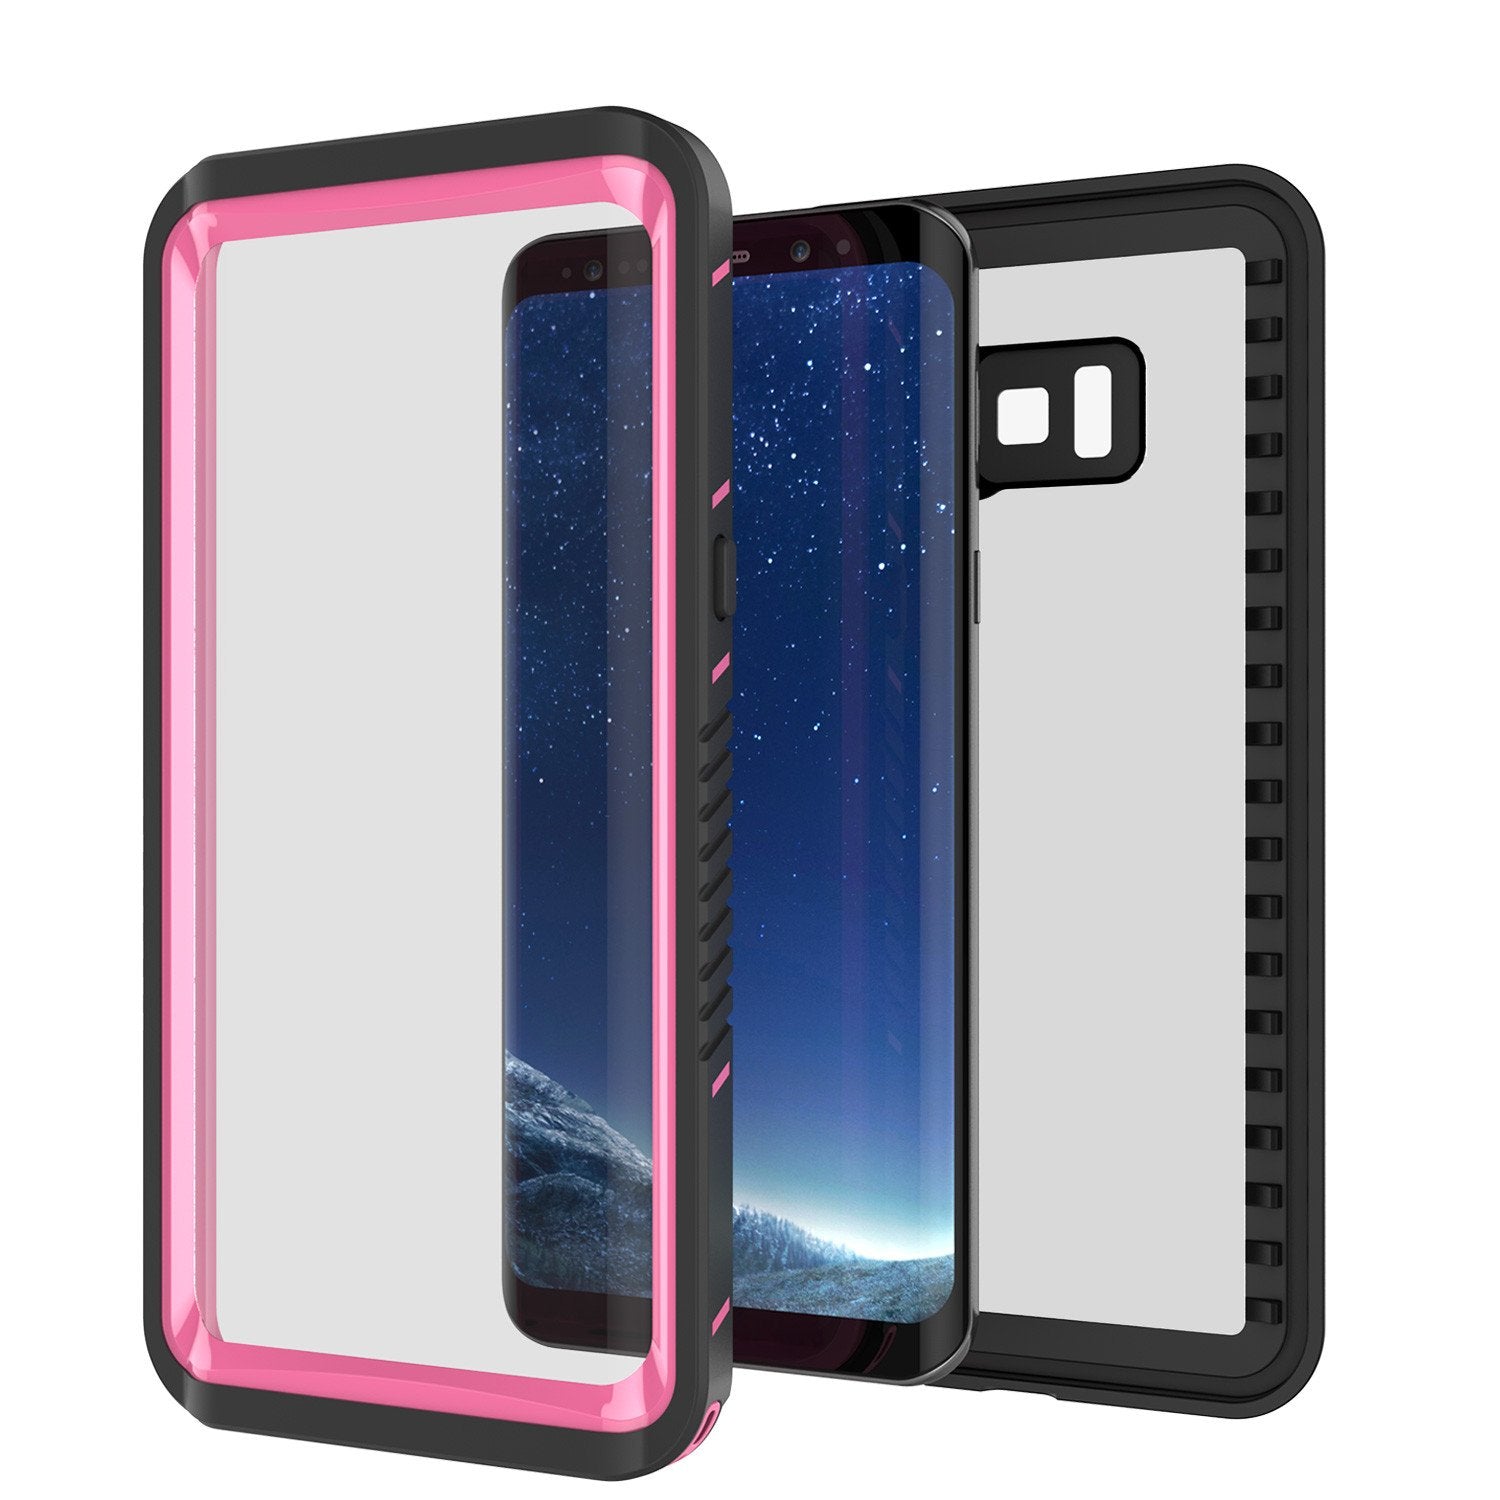 Galaxy S8 PLUS Waterproof Case, Punkcase [Extreme Series] Slim Fit, Armor Cover W/ Built In Screen Protector for Samsung Galaxy S8+ [Pink]